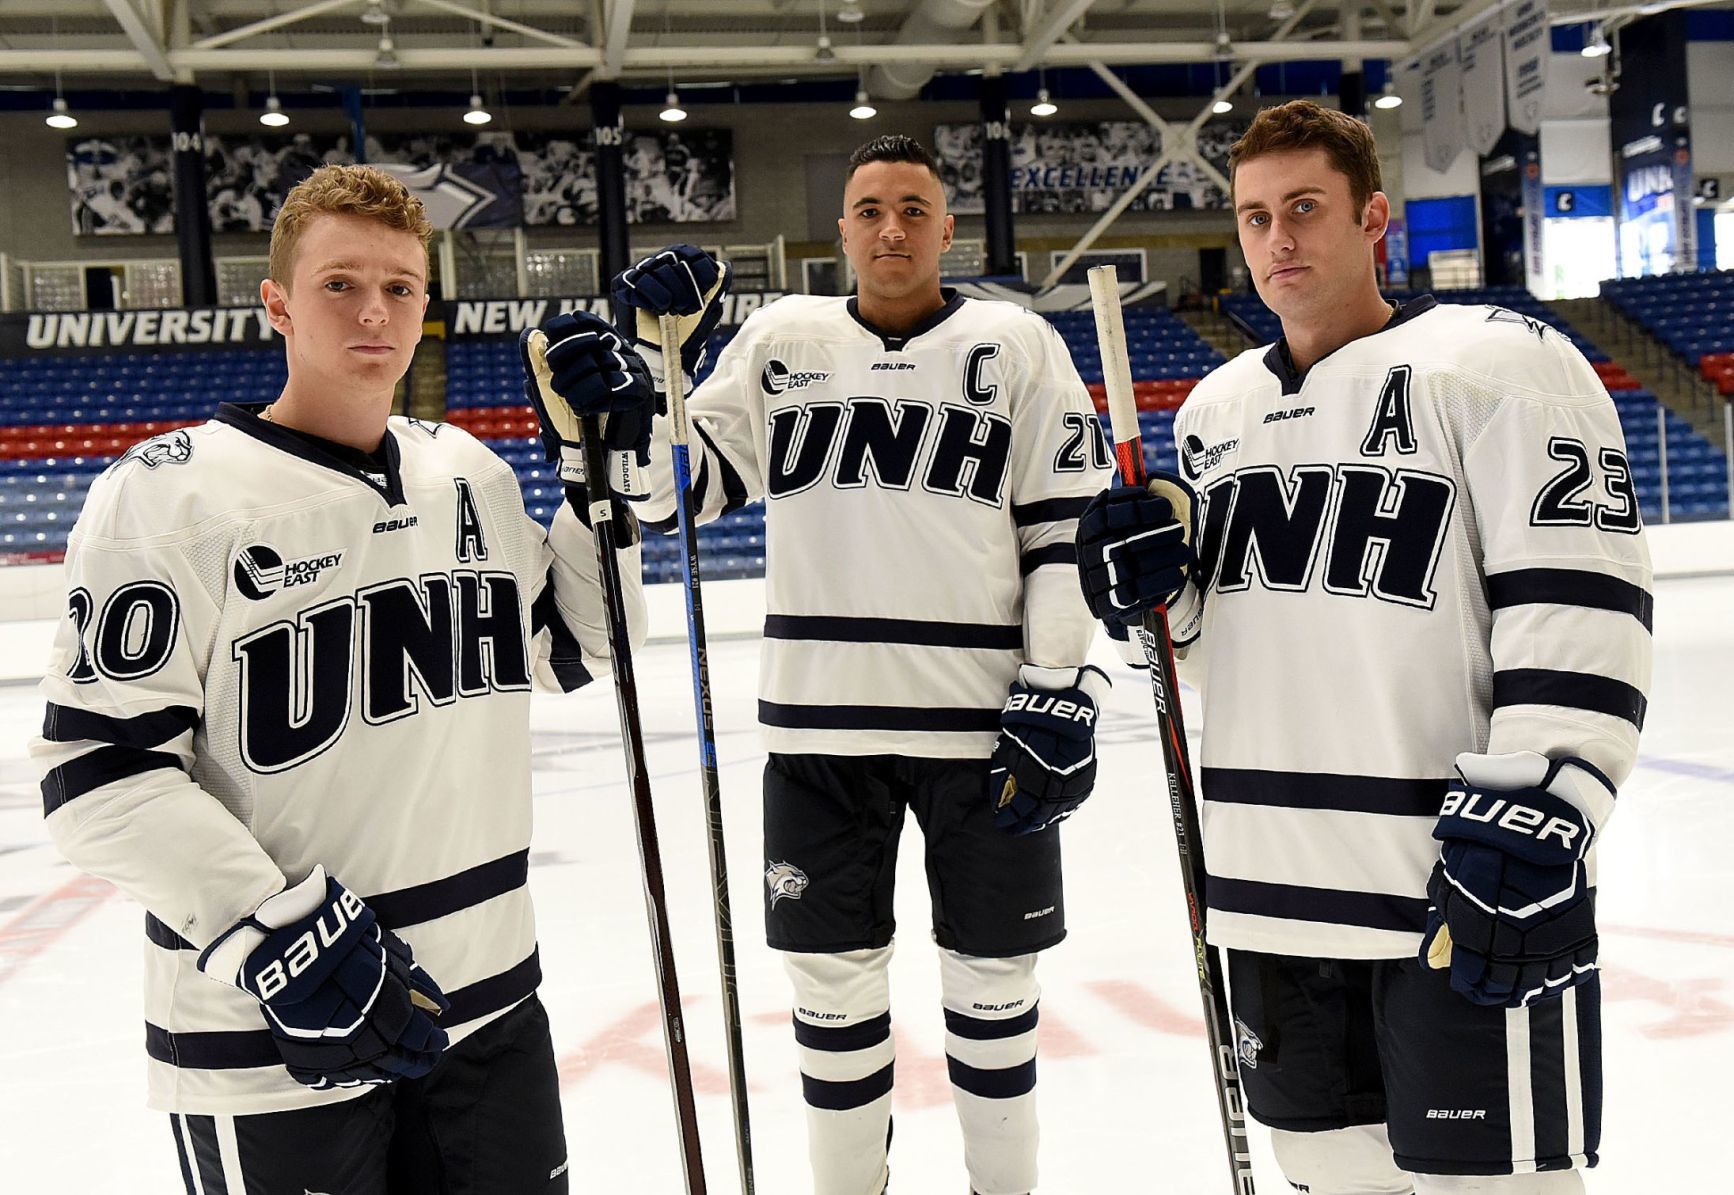 unh hockey players in nhl